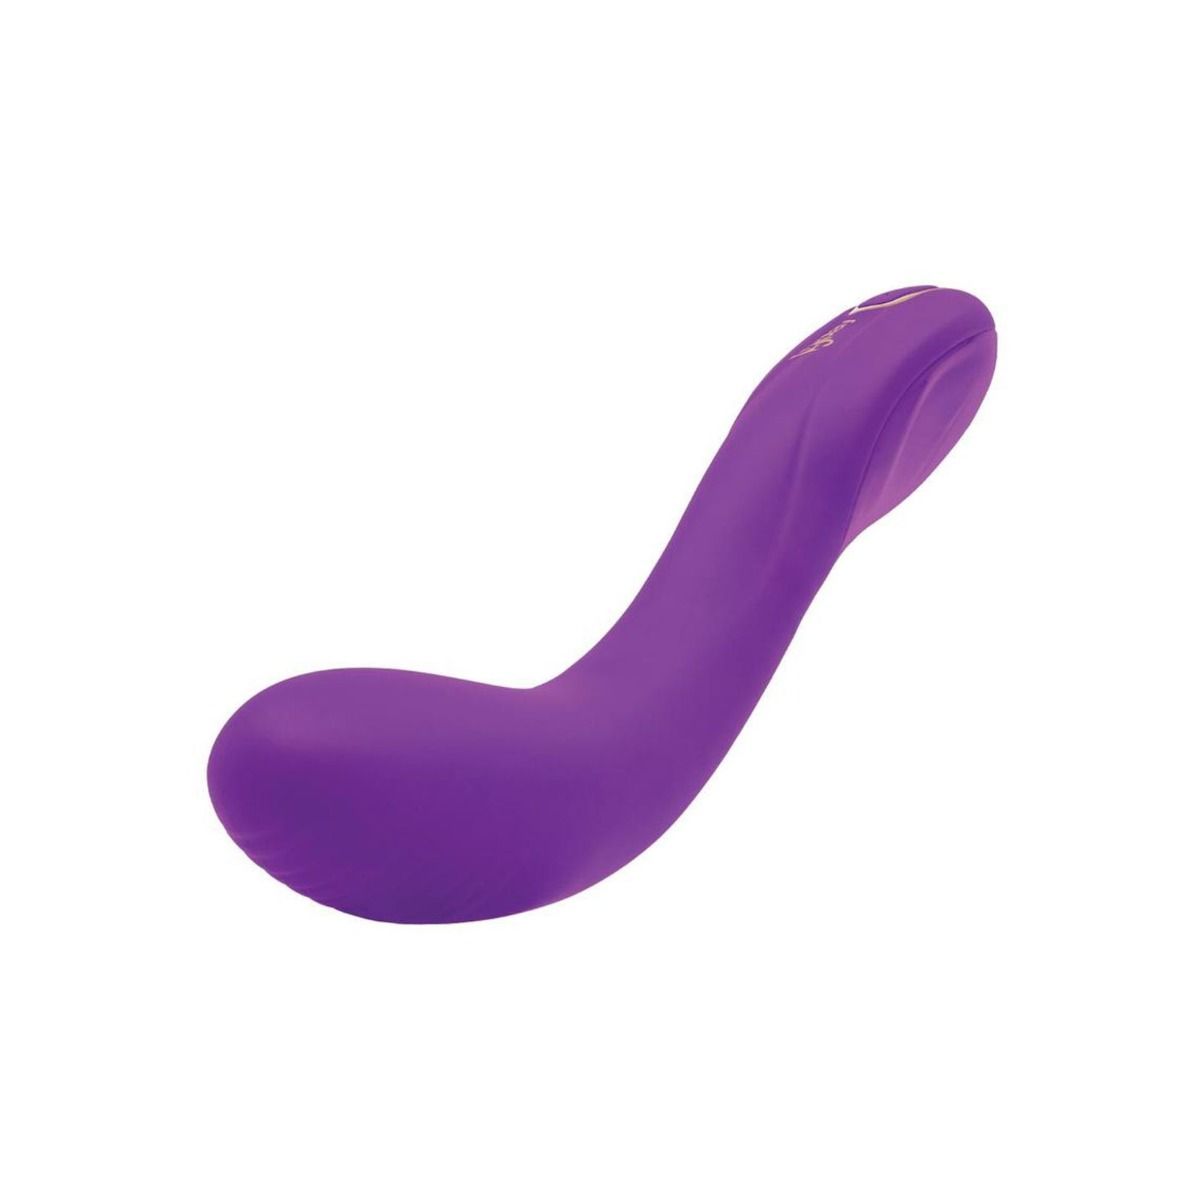 Bodywand G-Play Ergonomic Squirt Trainer G-Spot And Clitoral Vibrator Purple - Simply Pleasure